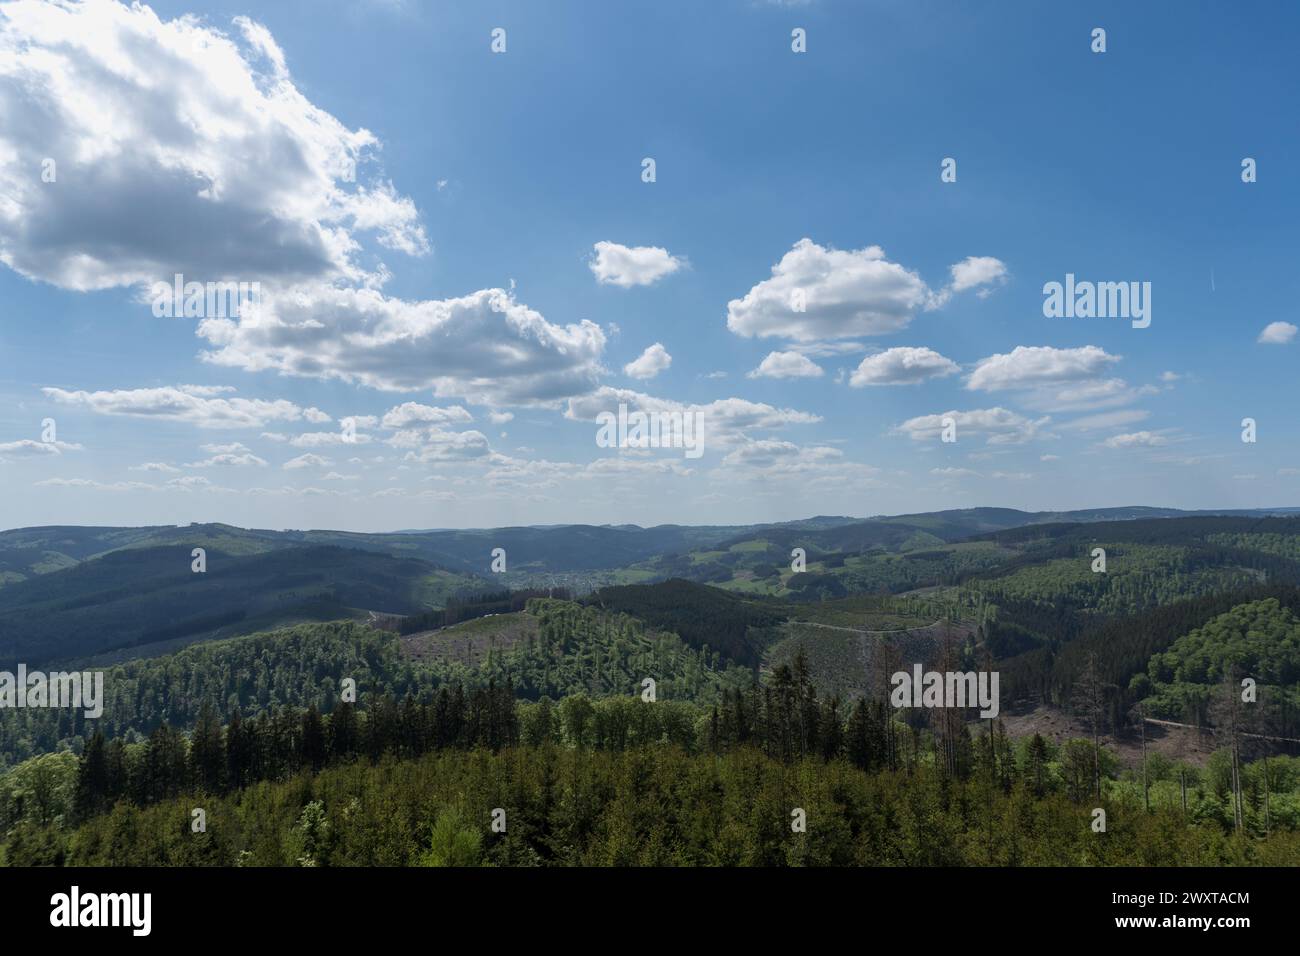 View from the tower called Bollerbergturm in the germany area Rothaargebirge Stock Photo